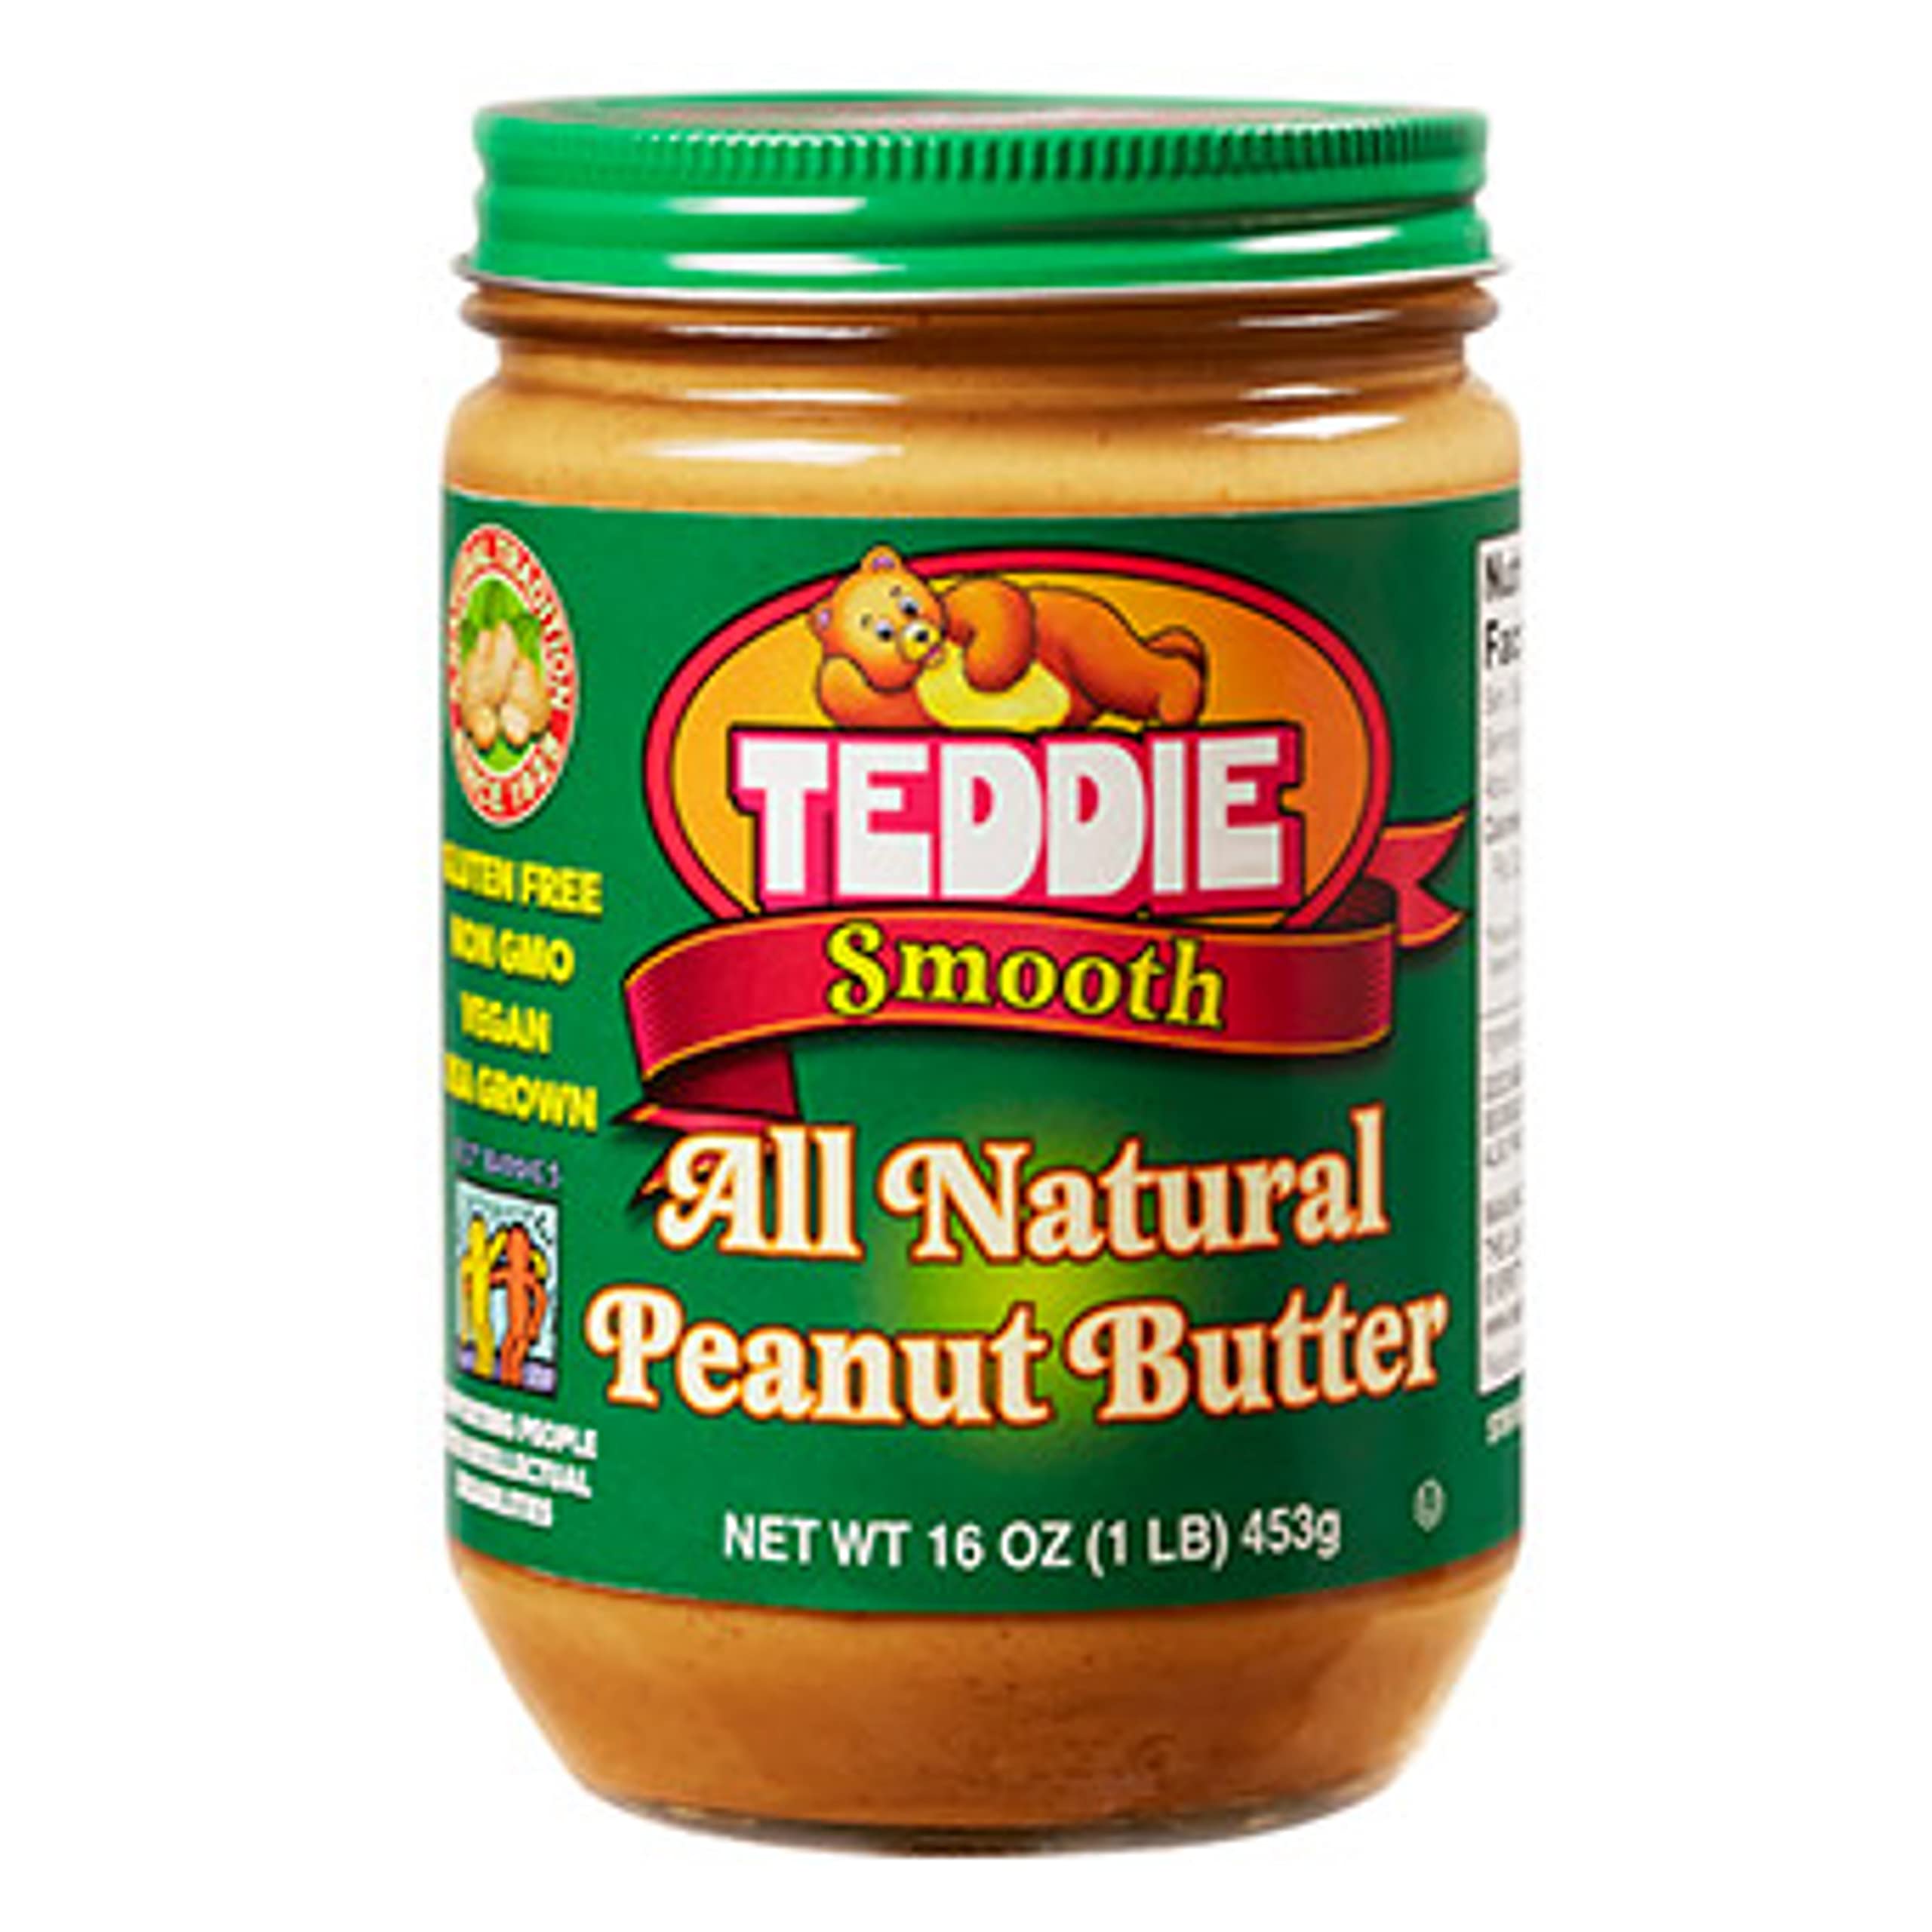 Teddie All Natural Peanut Butter, Smooth, Gluten Free & Vegan, 16 Ounce Glass (Smooth, Pack of 1)